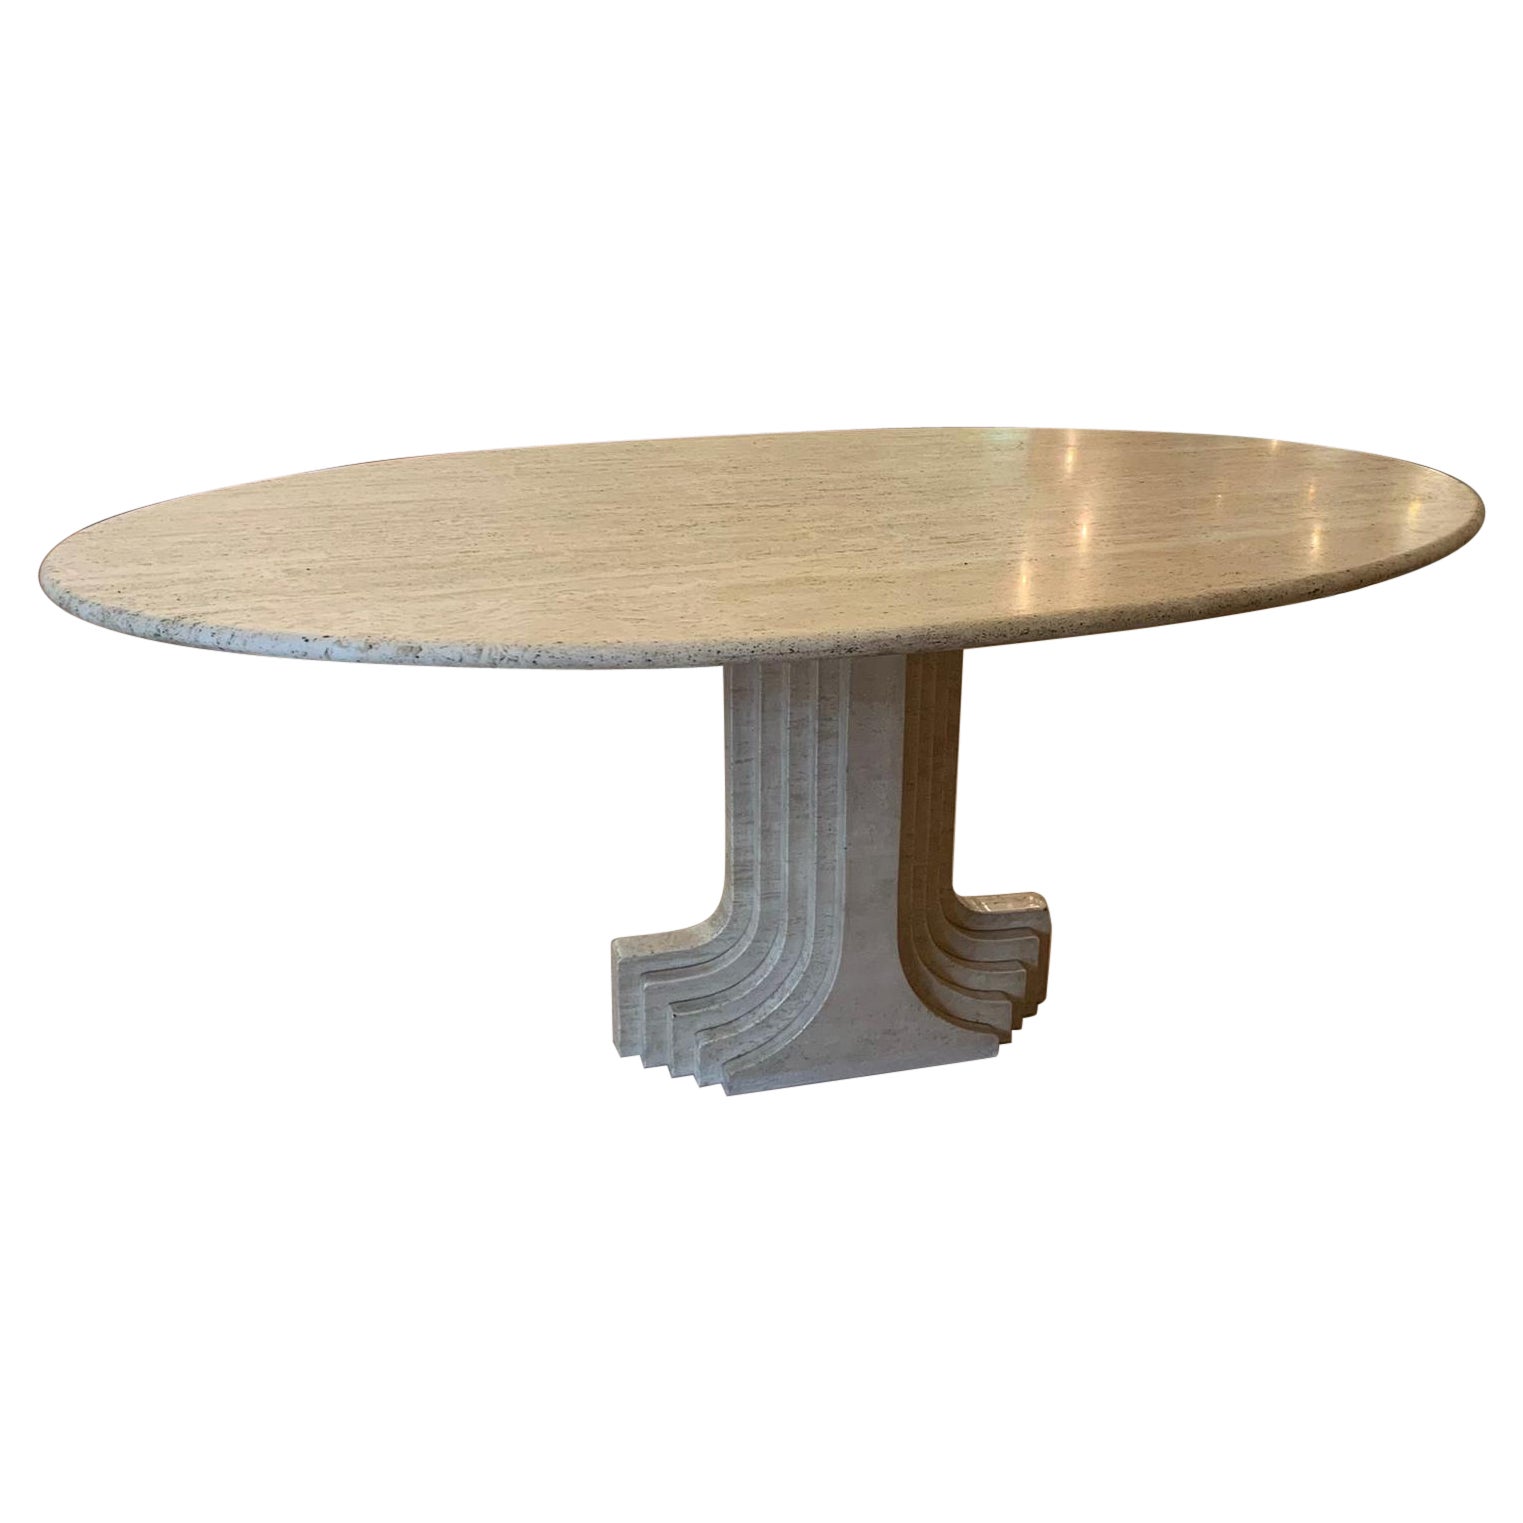 Large Vintage Oval Table "Argo" in Travertine by Carlo Scarpa